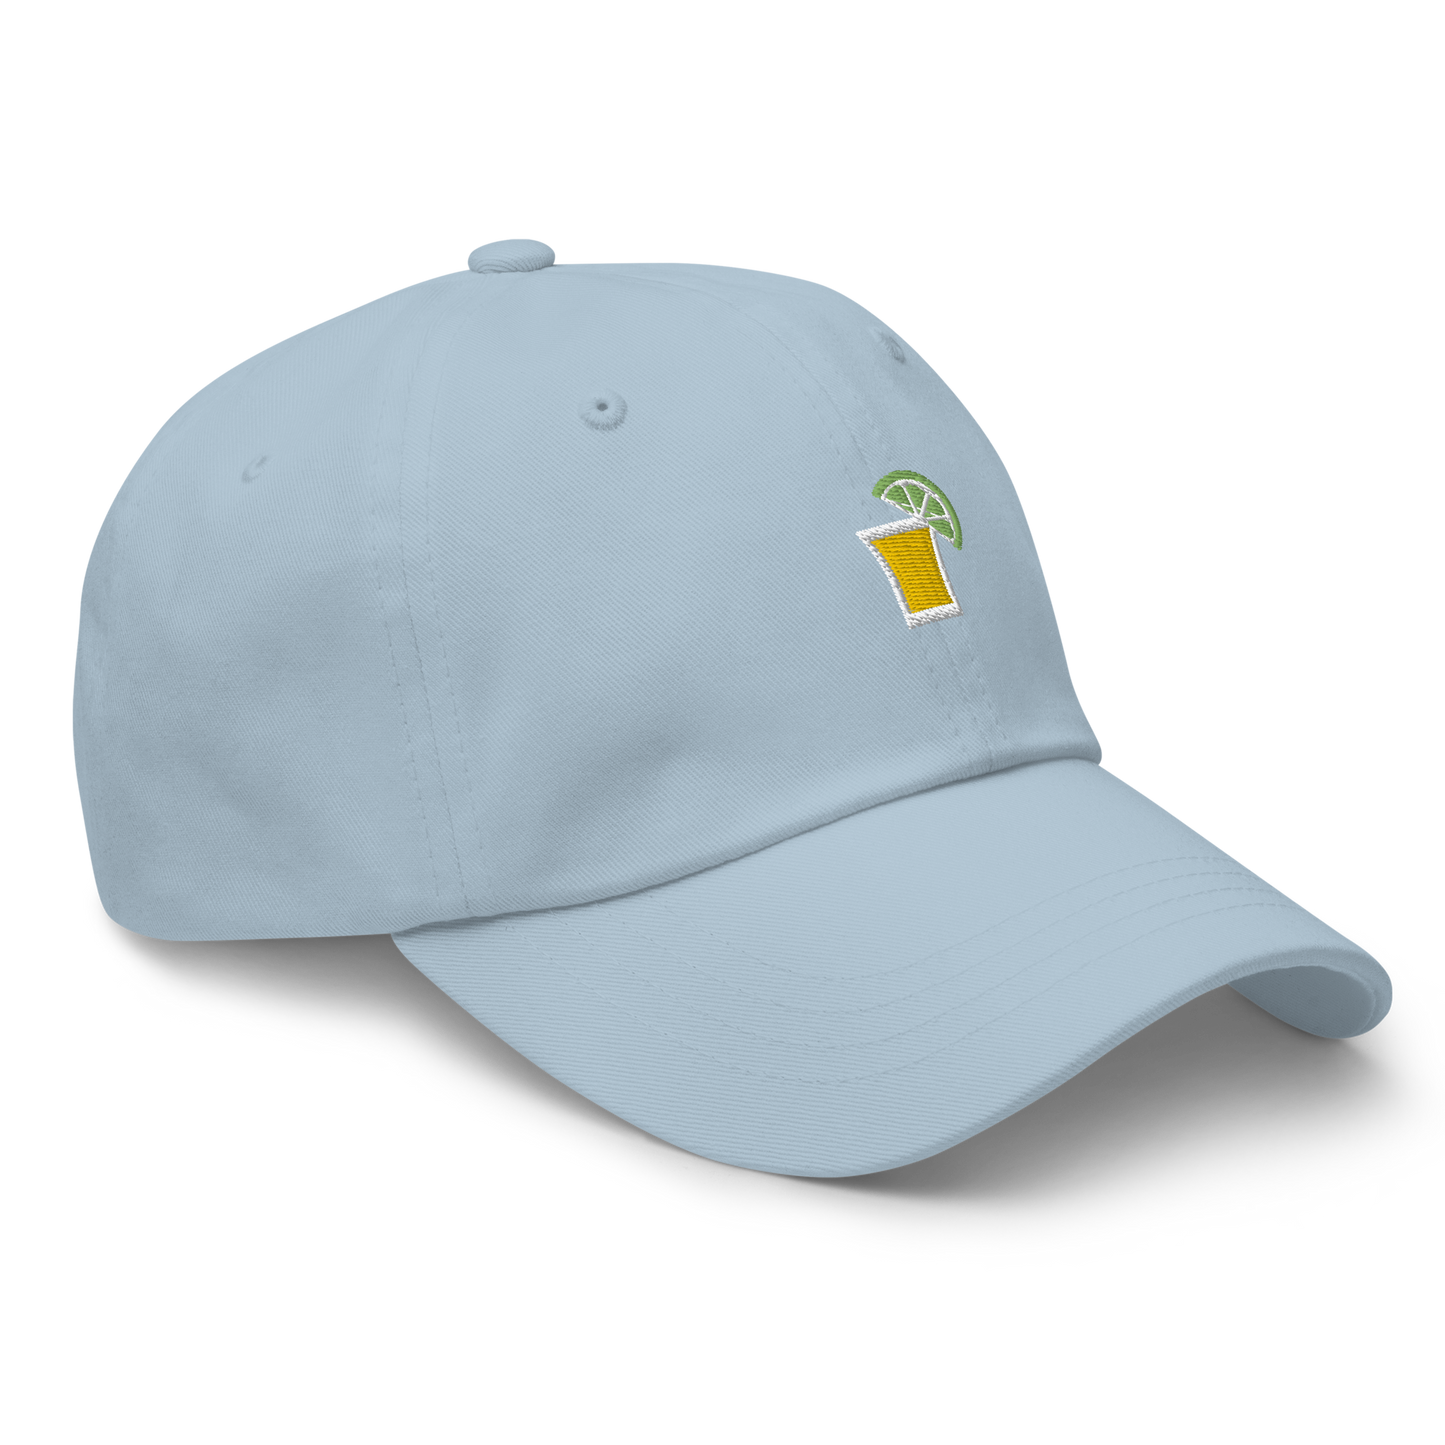 Tequila Shot Embroidered Dad Hat